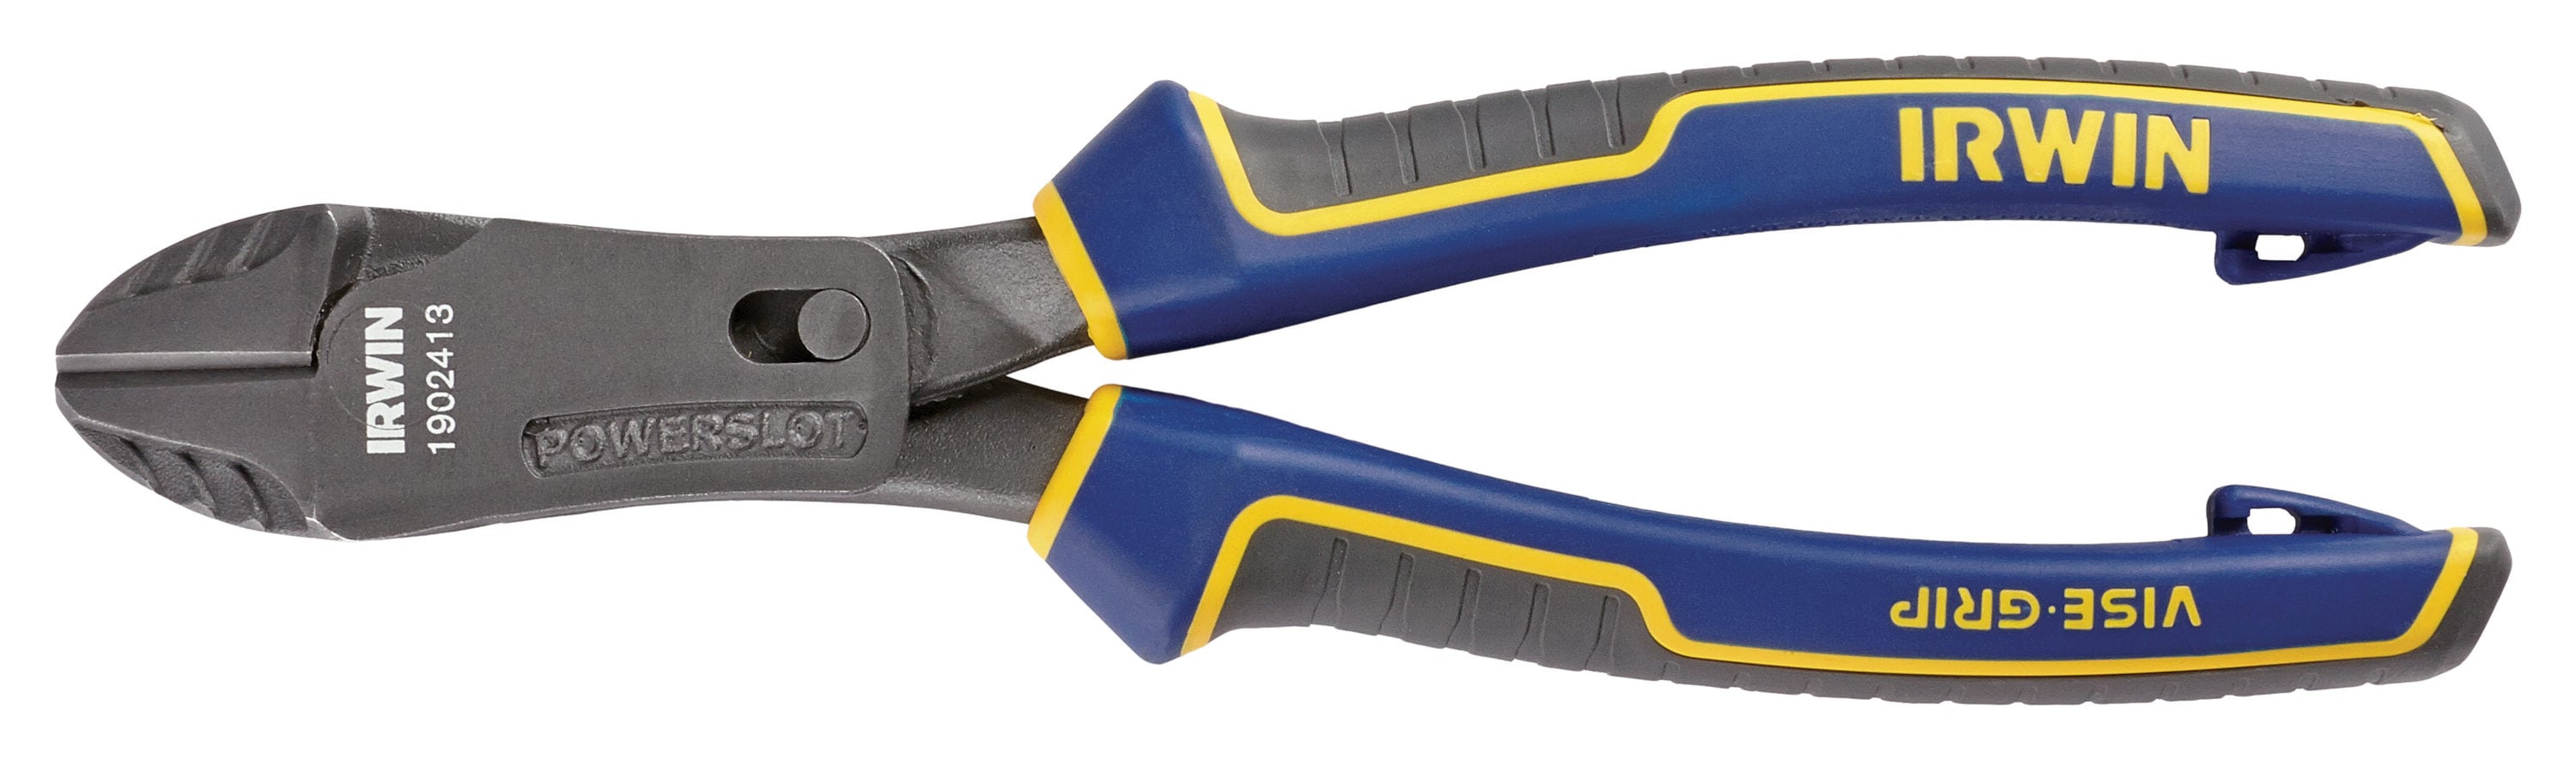 Irwin 8 Diagonal Cutting Pliers with Wire Cutters - 2078308